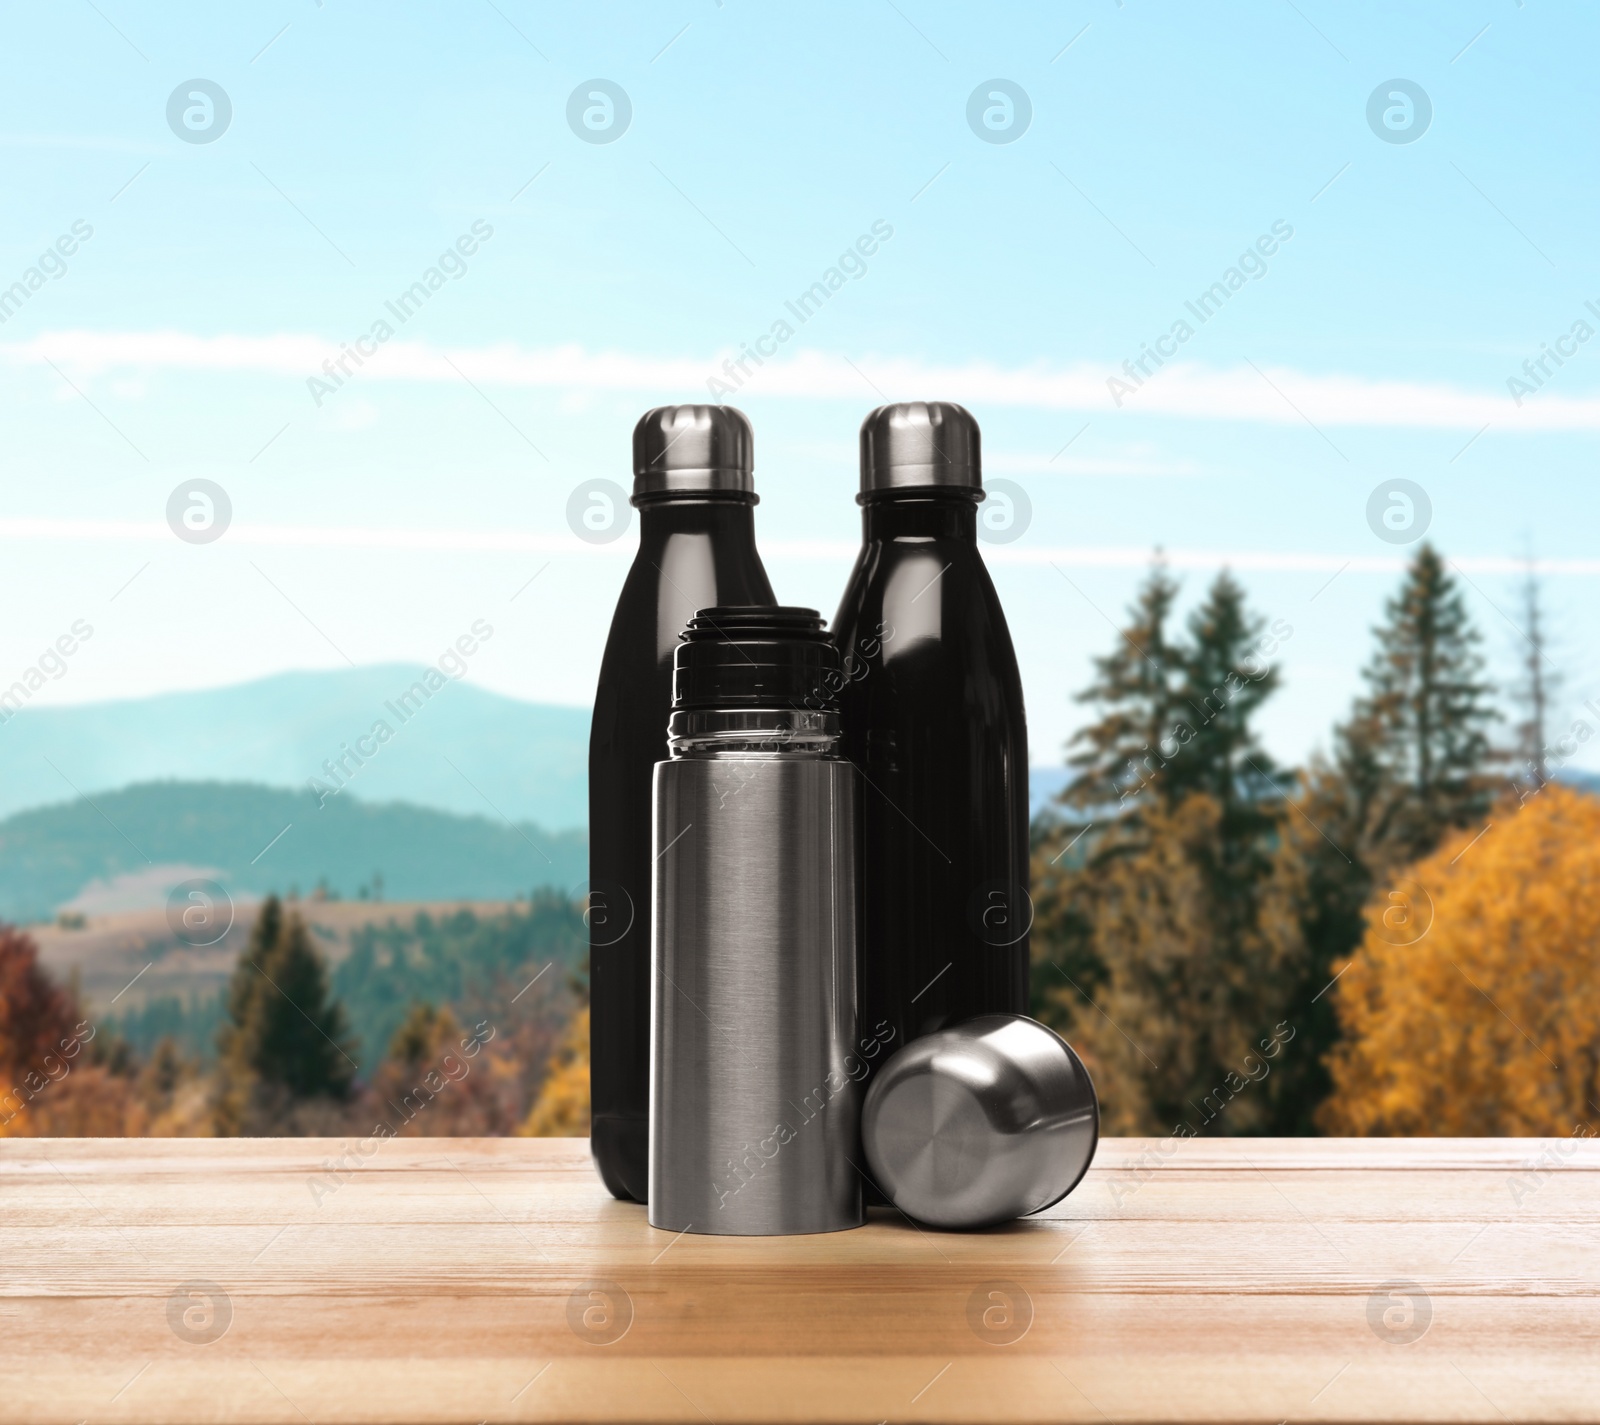 Image of Thermos bottles on wooden table against blurred mountain landscape